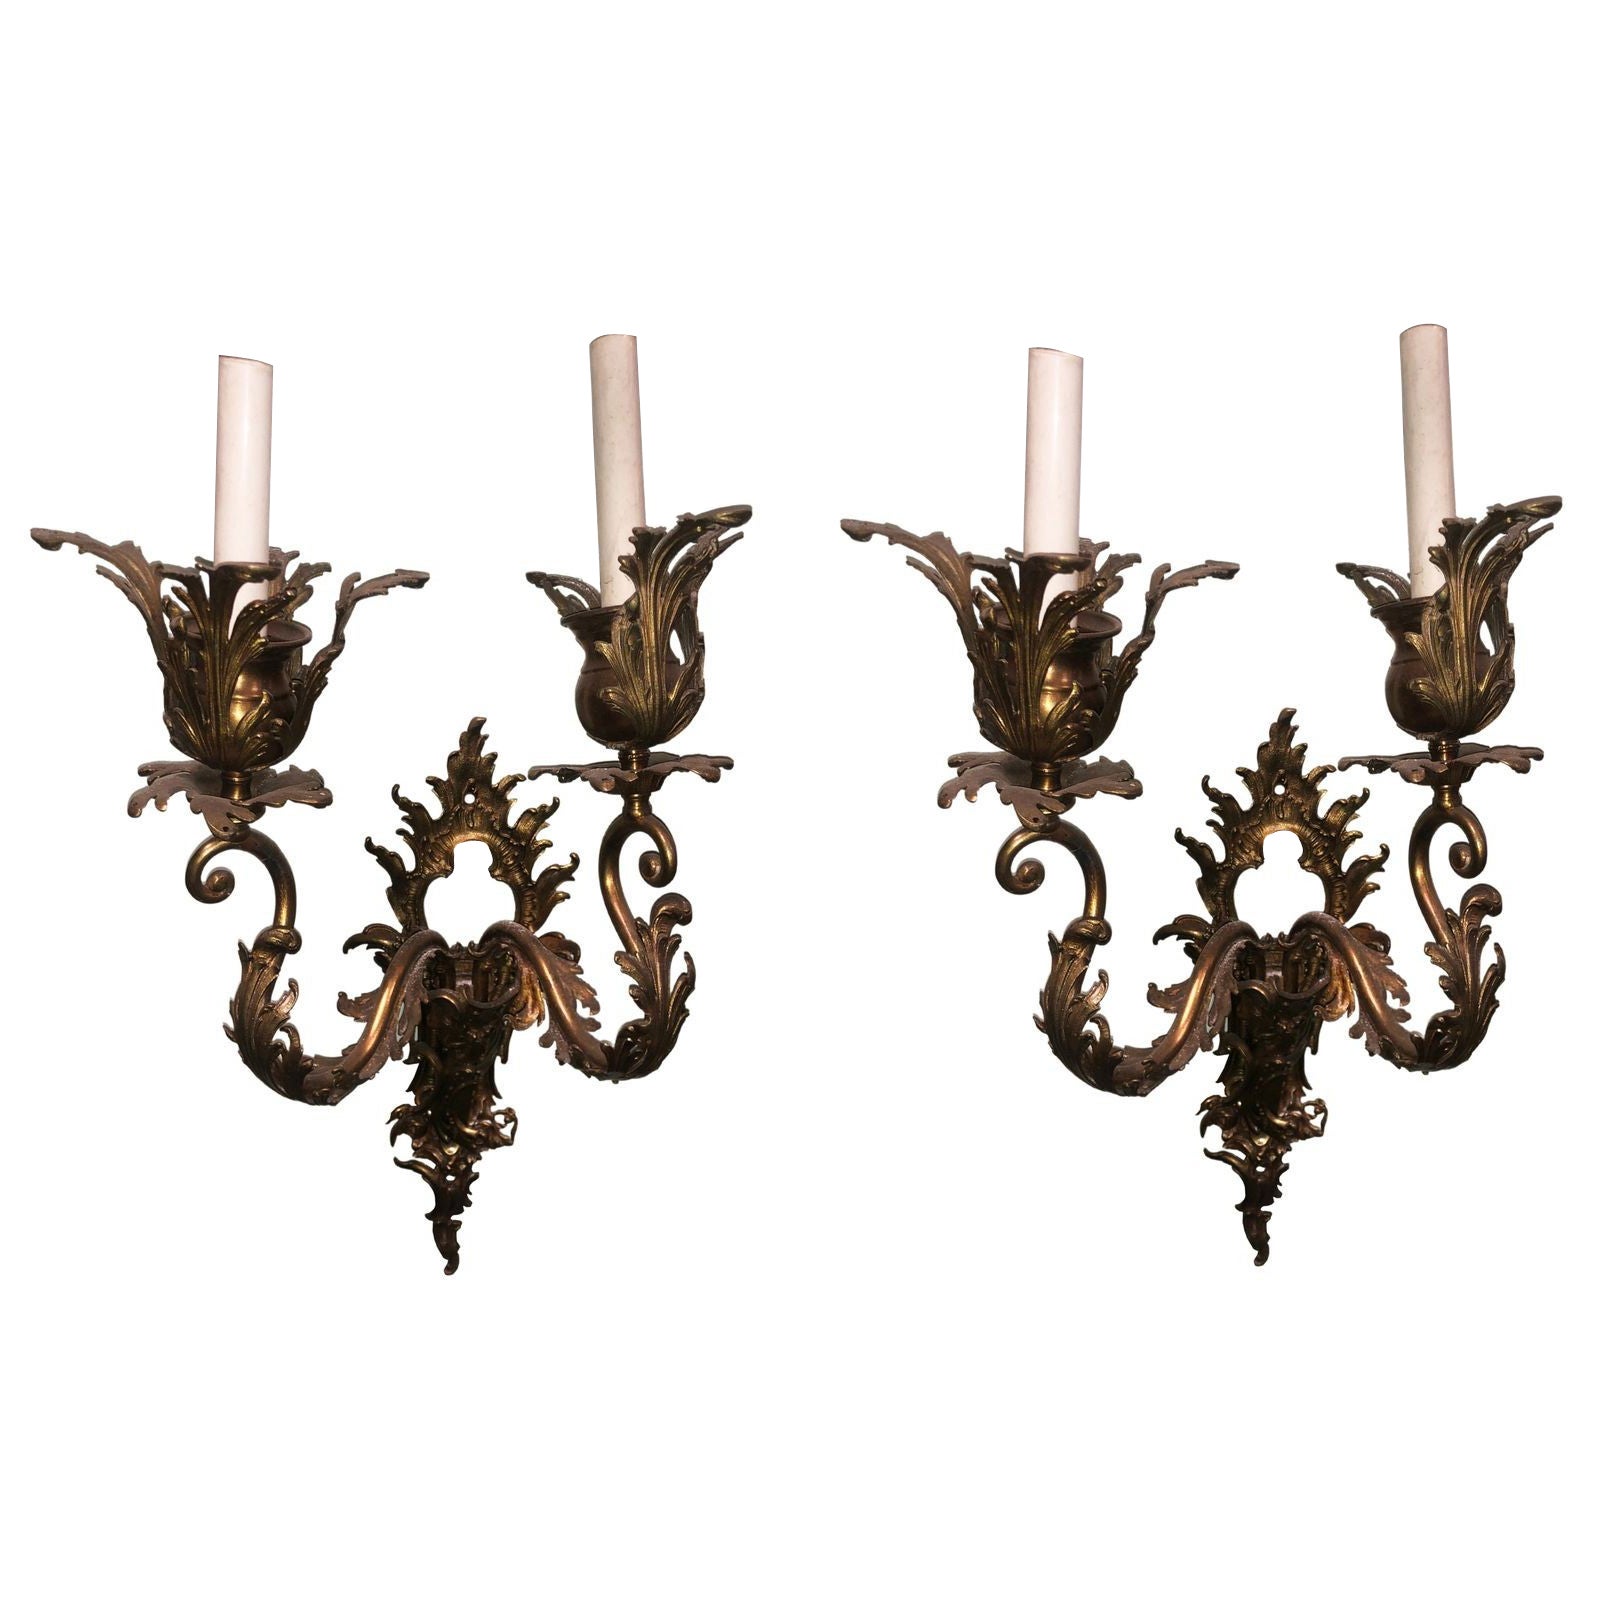 Italian Baroque Candelabra Style Wall Sconce, Pair